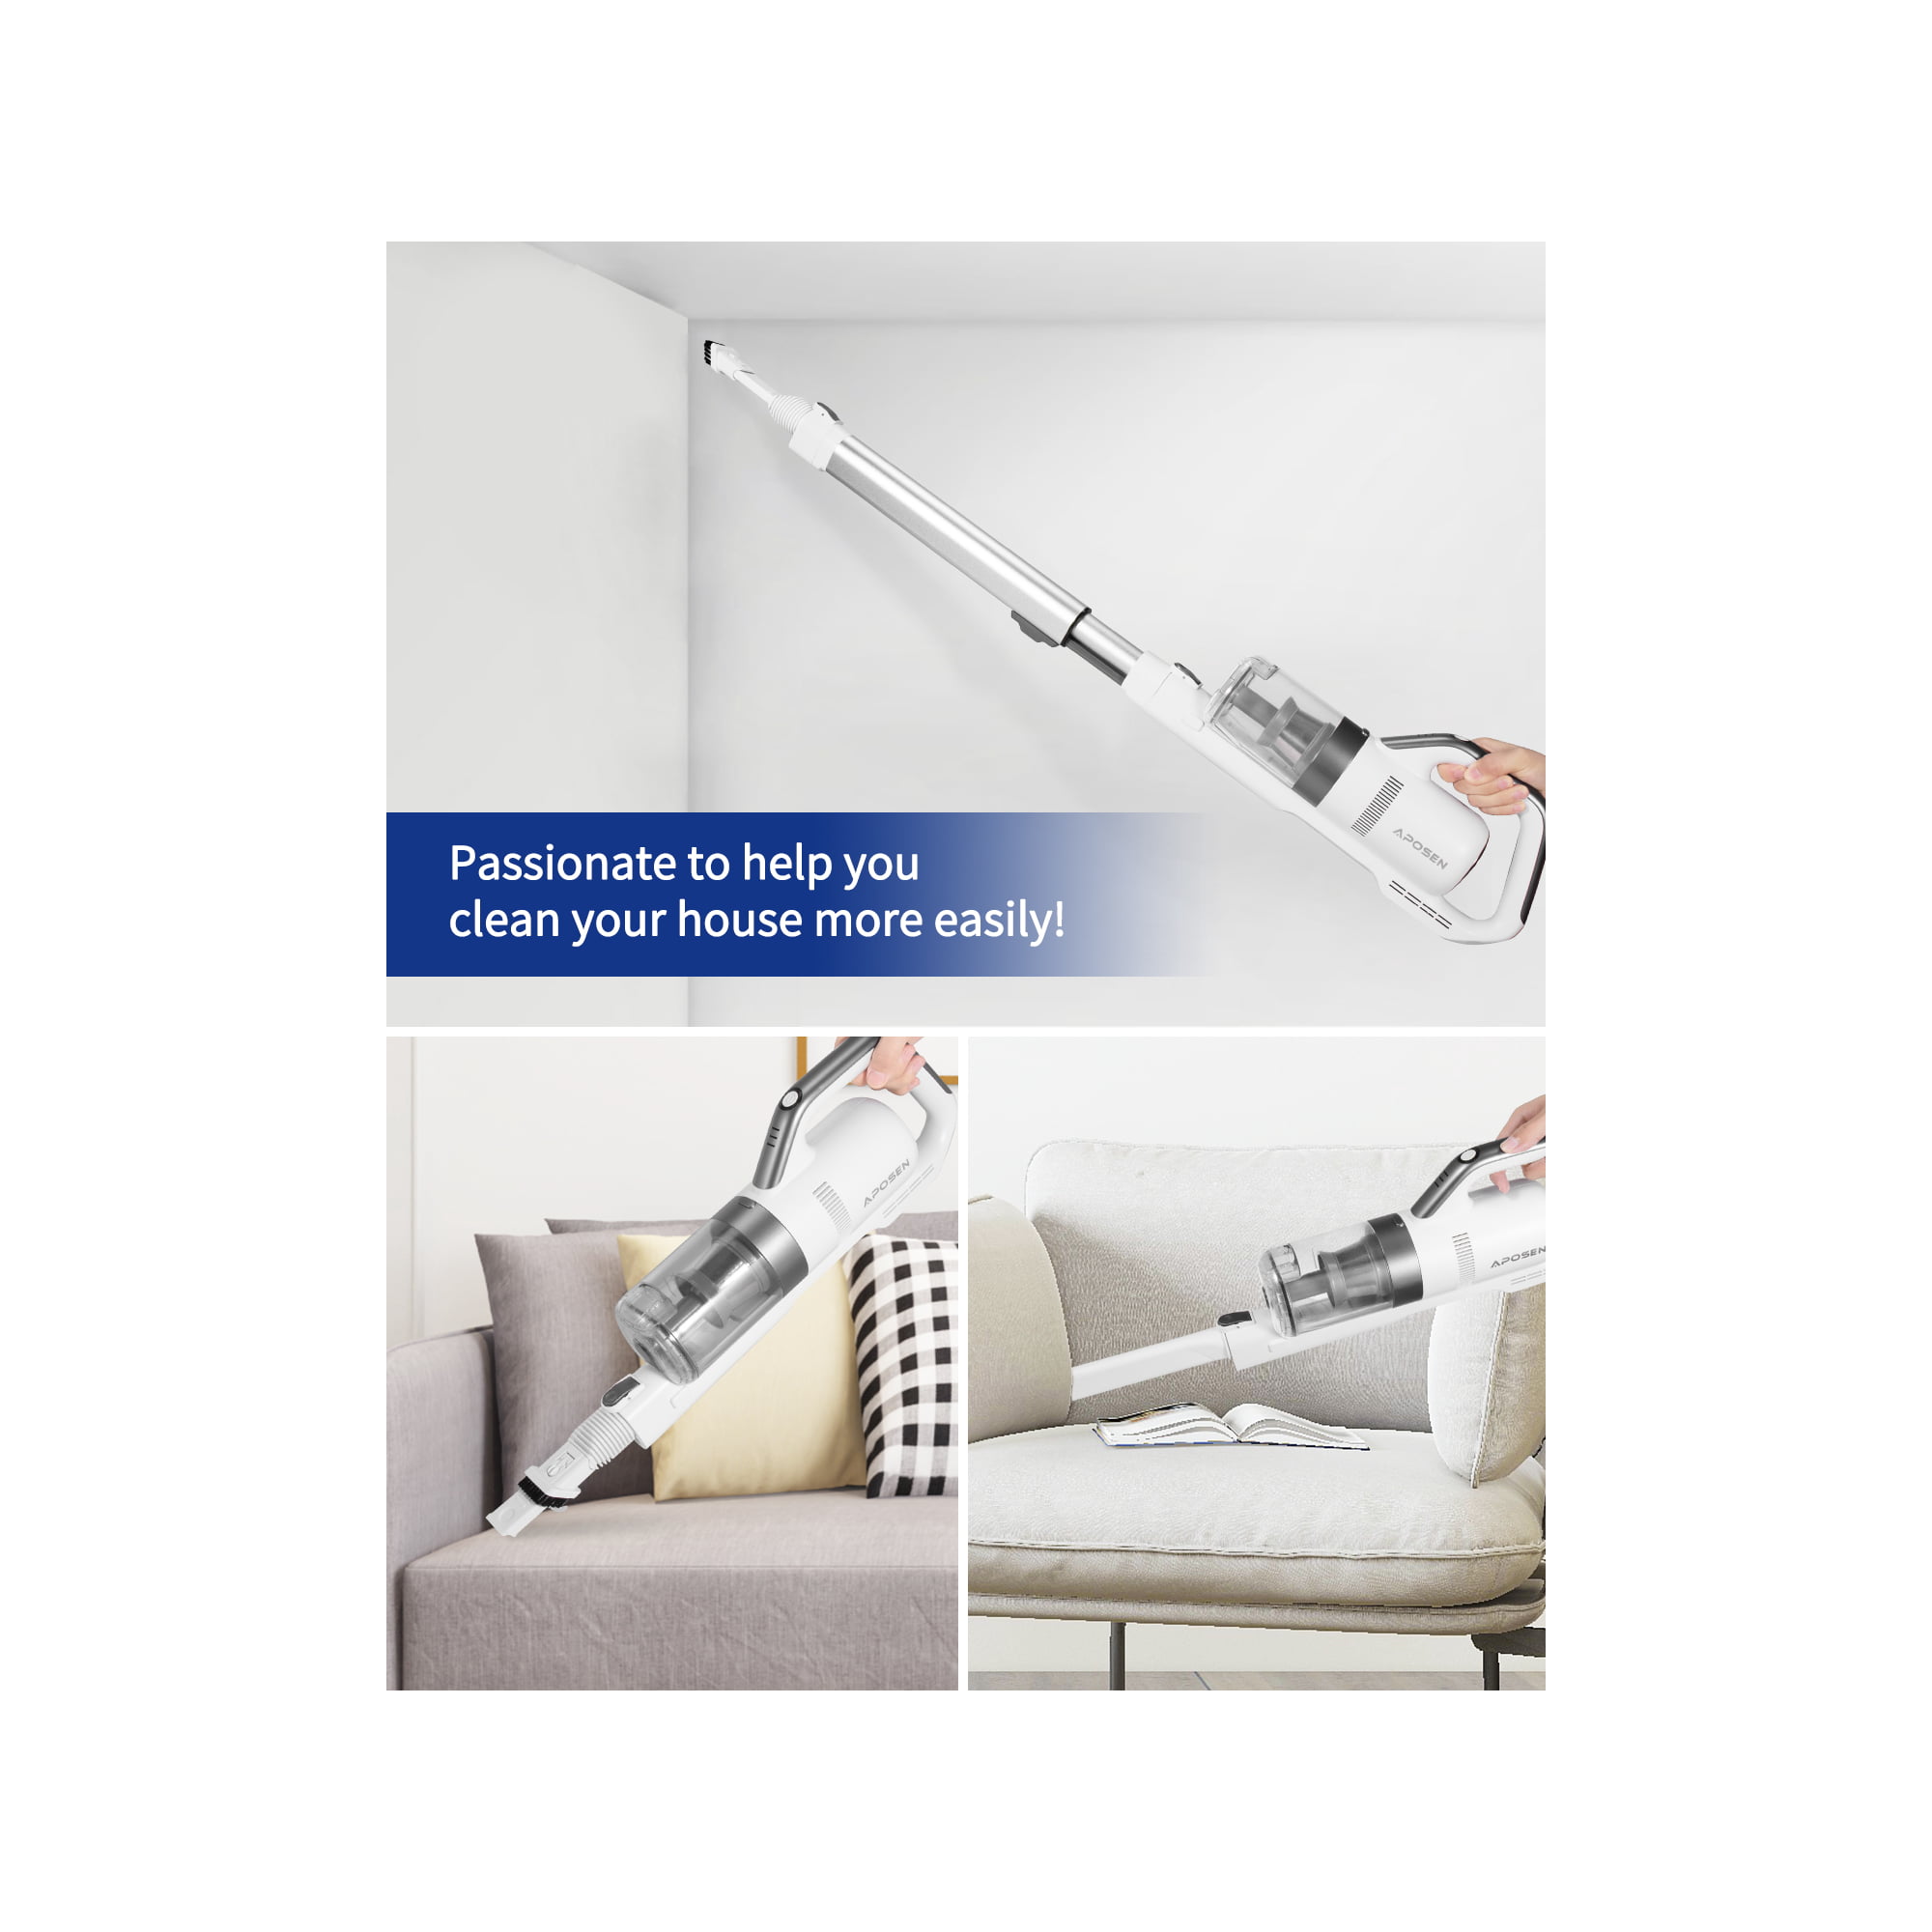 Aposen Cordless Vacuum 4-in-1 Lightweight Stick Vacuum Cleaner with Mite Remover for Bed Sofa Carpet Hard Floors H22S - image 5 of 9